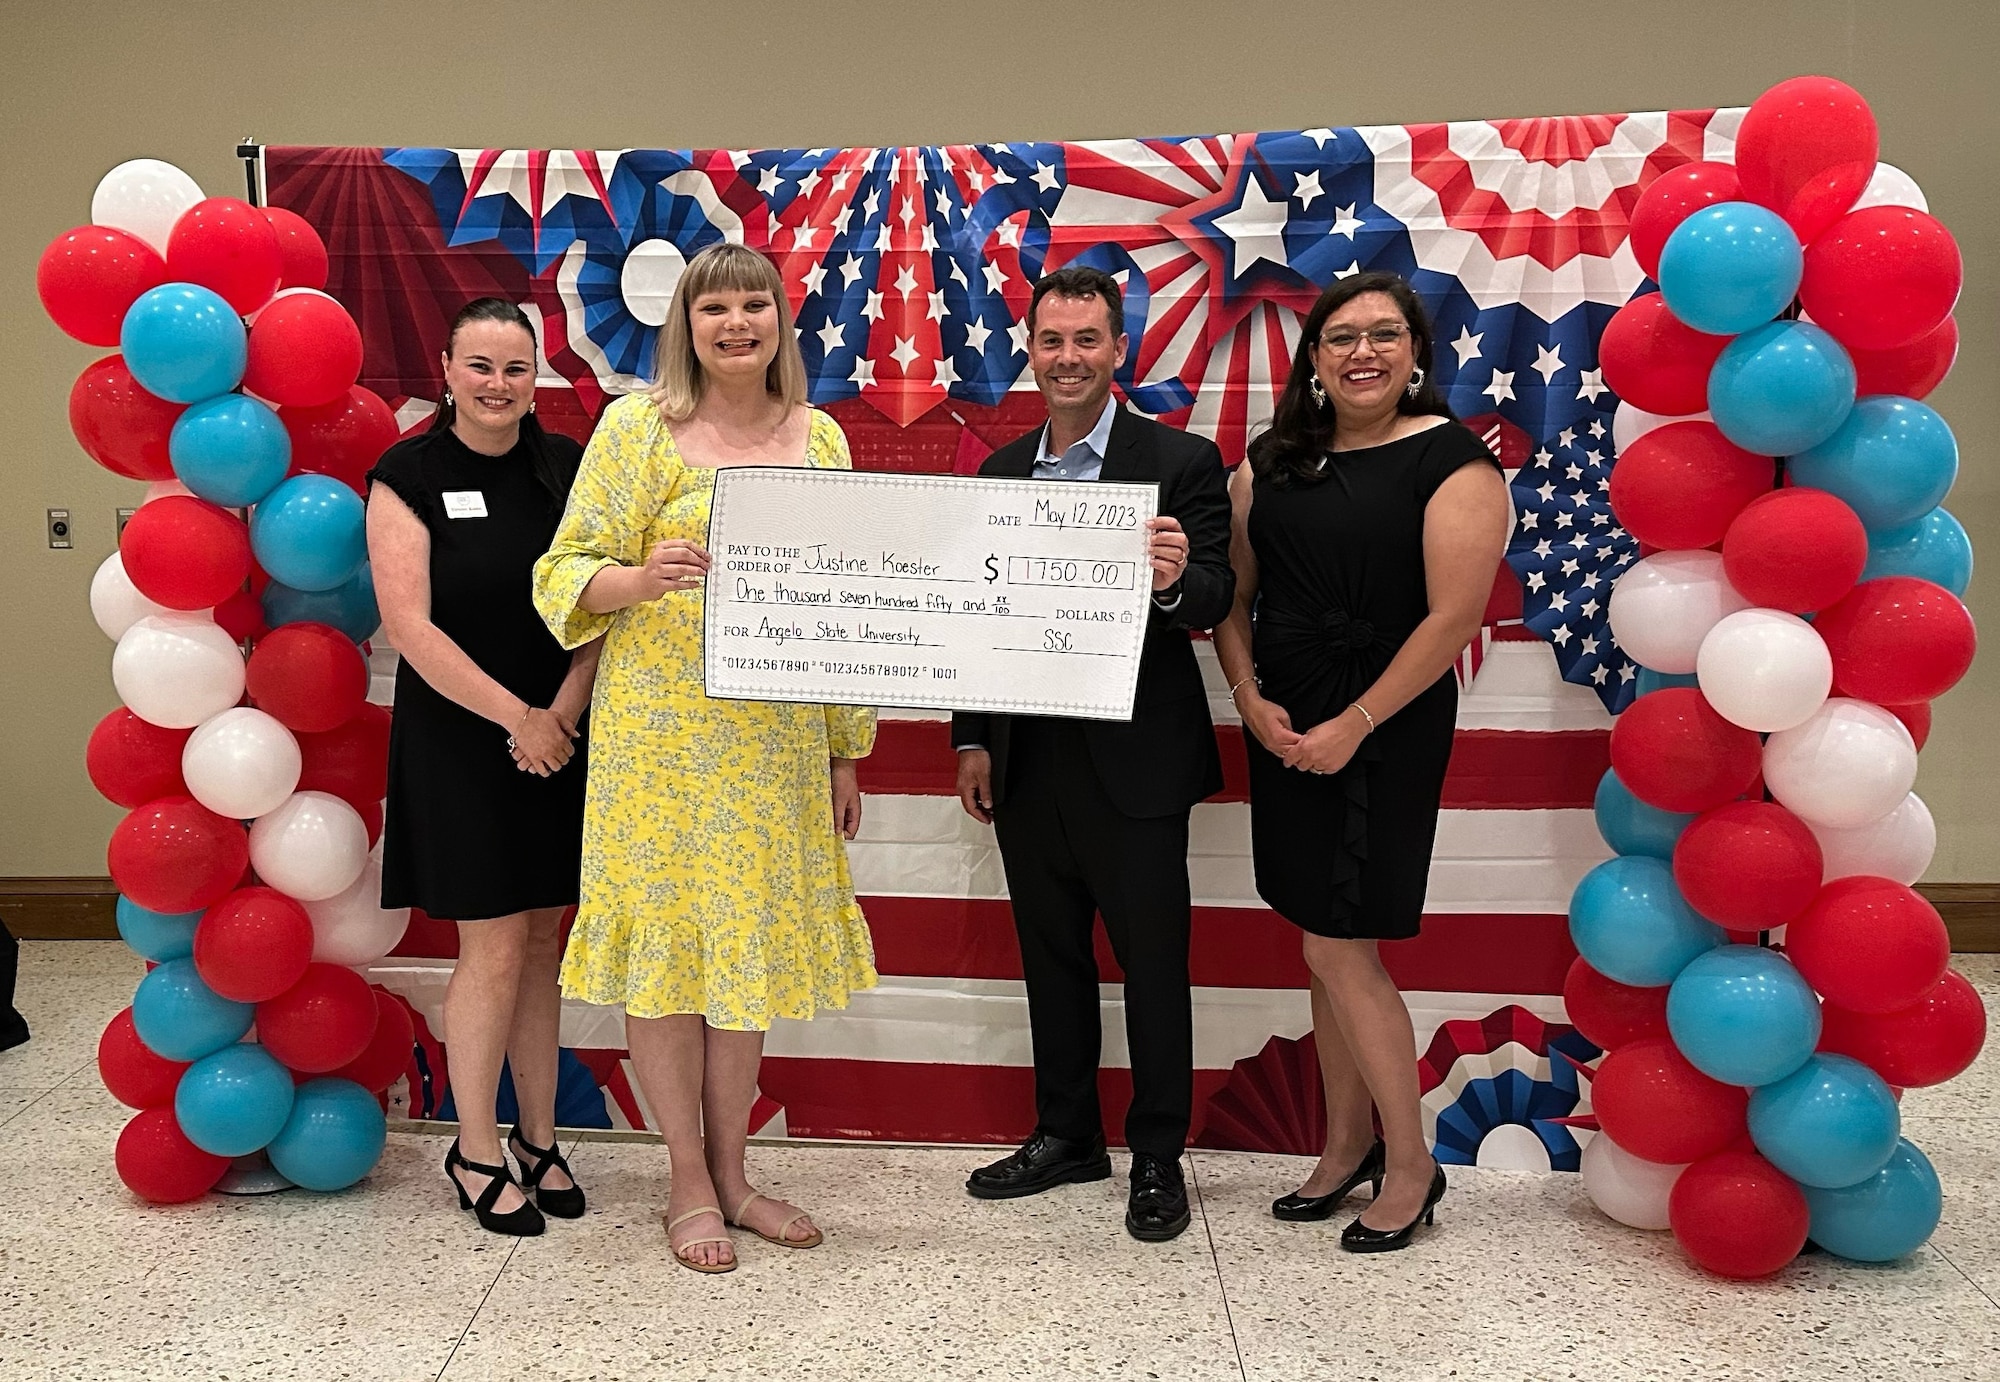 The Sheppard Spouses Club awarded military dependents at its annual scholarship dinner and ceremony. The SSC awarded 36 scholarships totaling $44,850 to military dependents. (Courtesy photo)